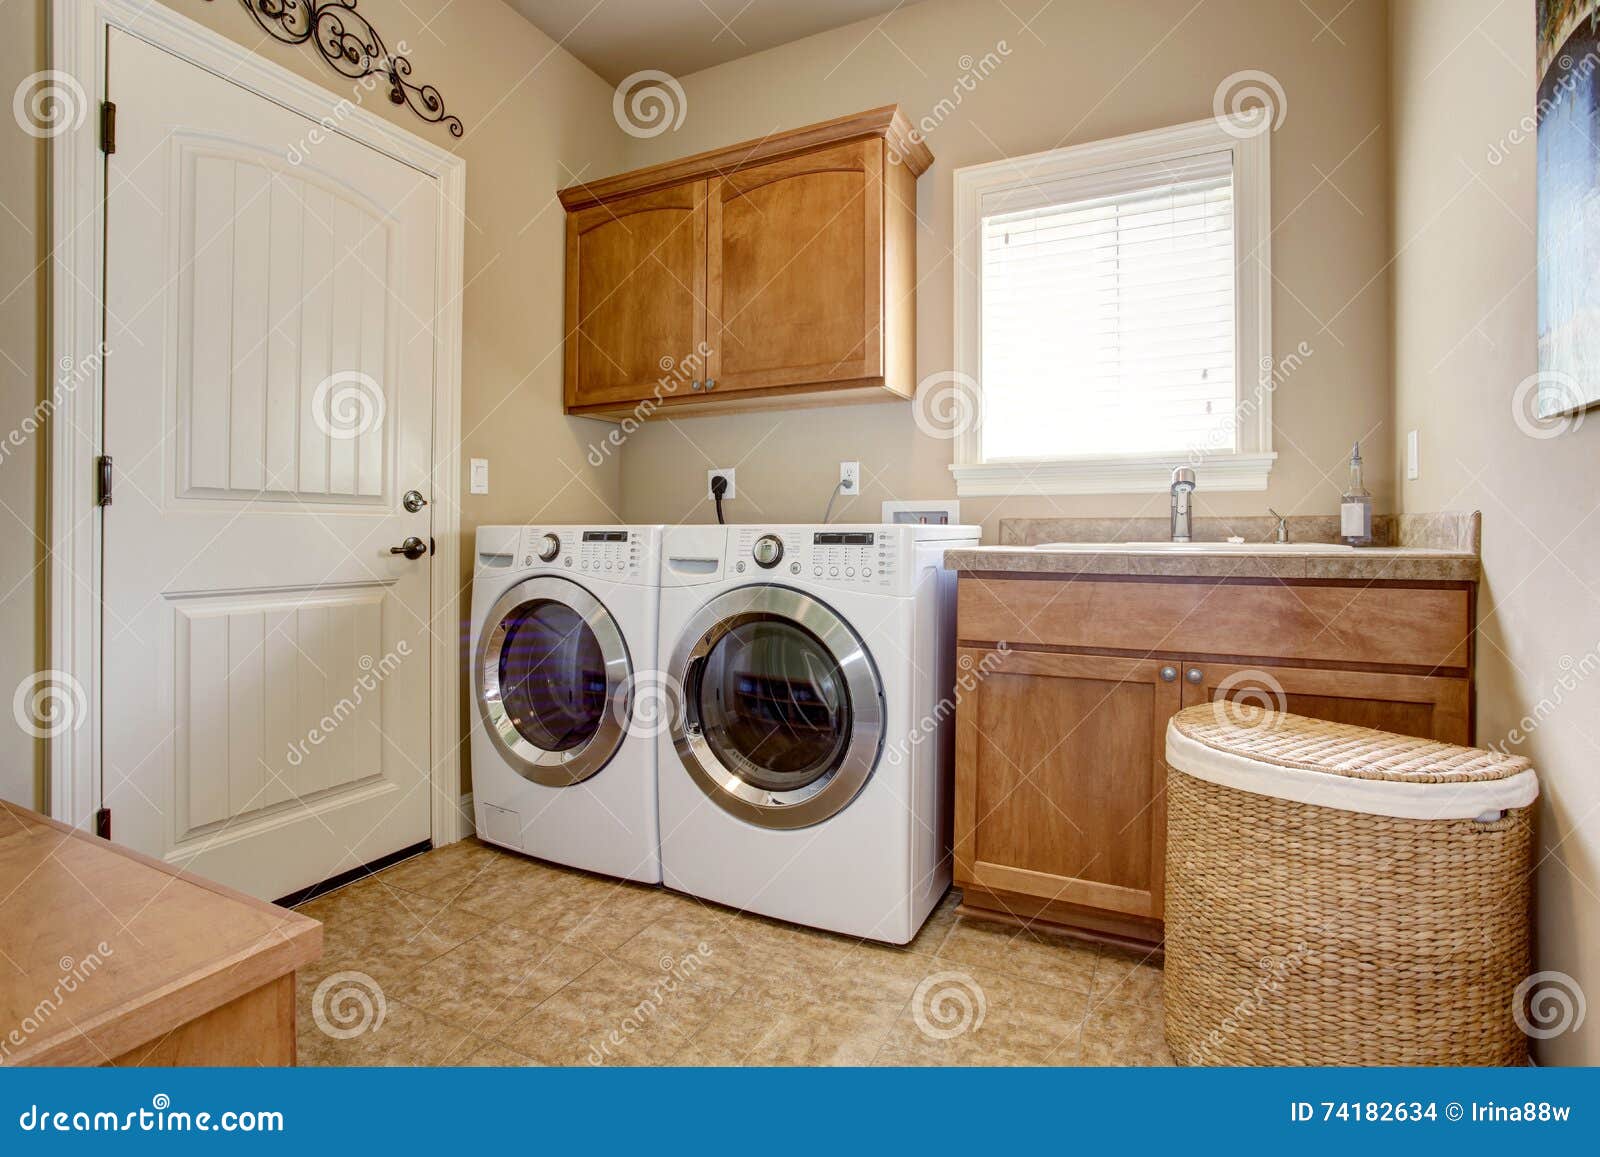 laundry room with washer and dryer.